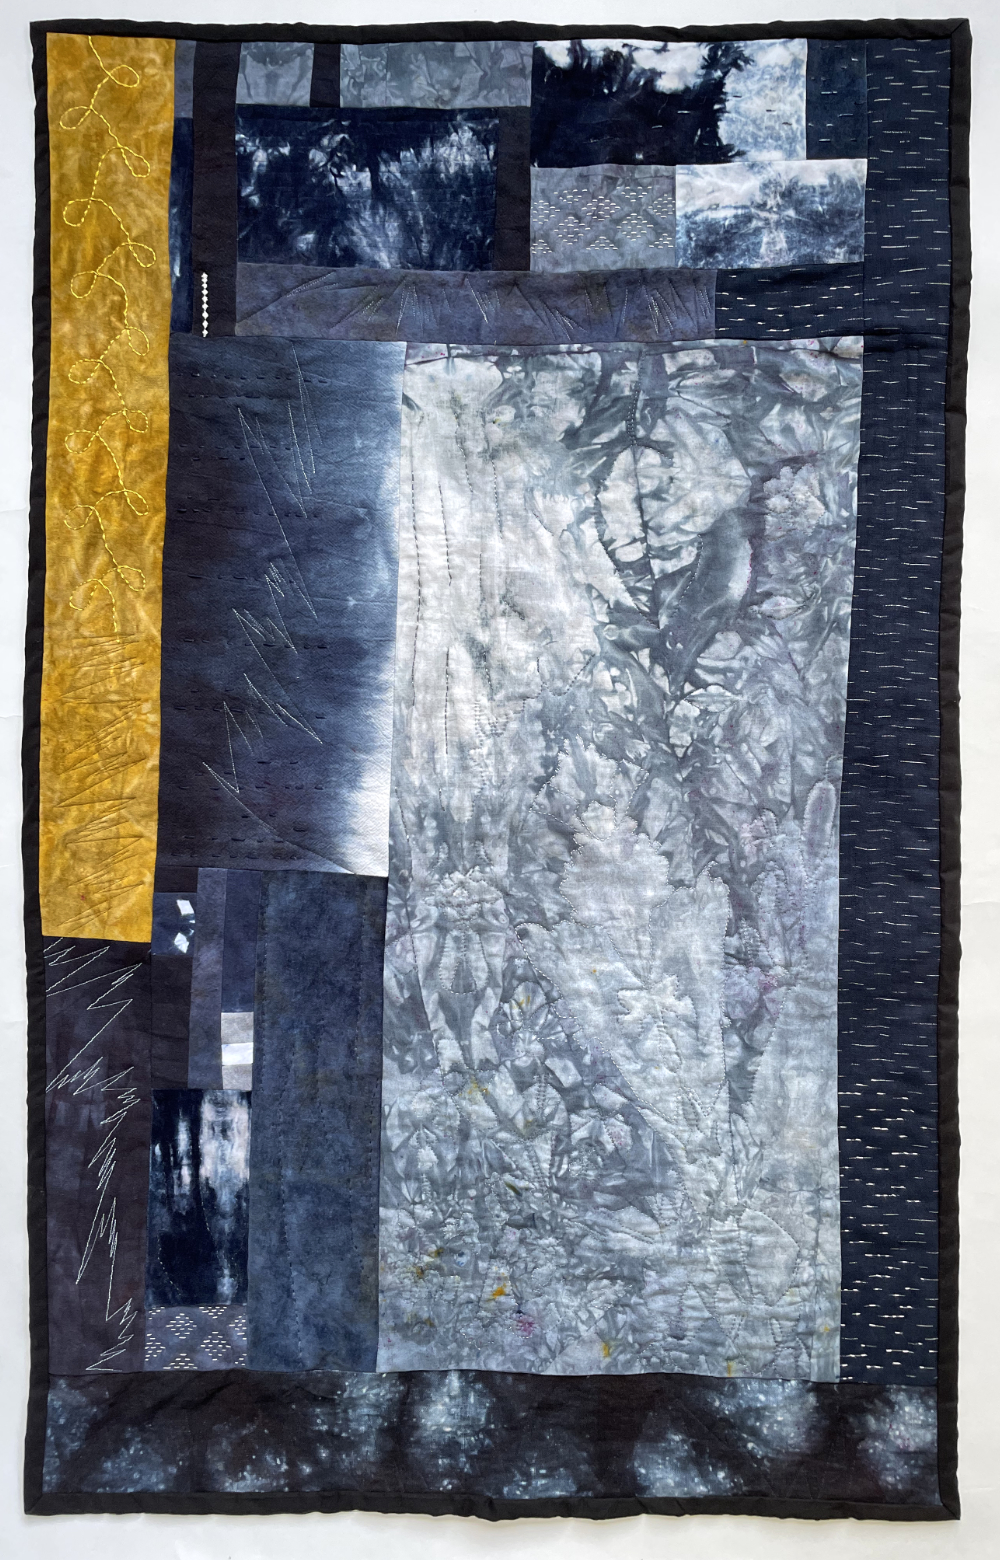 abstract rectangles in shades of dark blue with bursts of light and contrasting gold stripe on the left